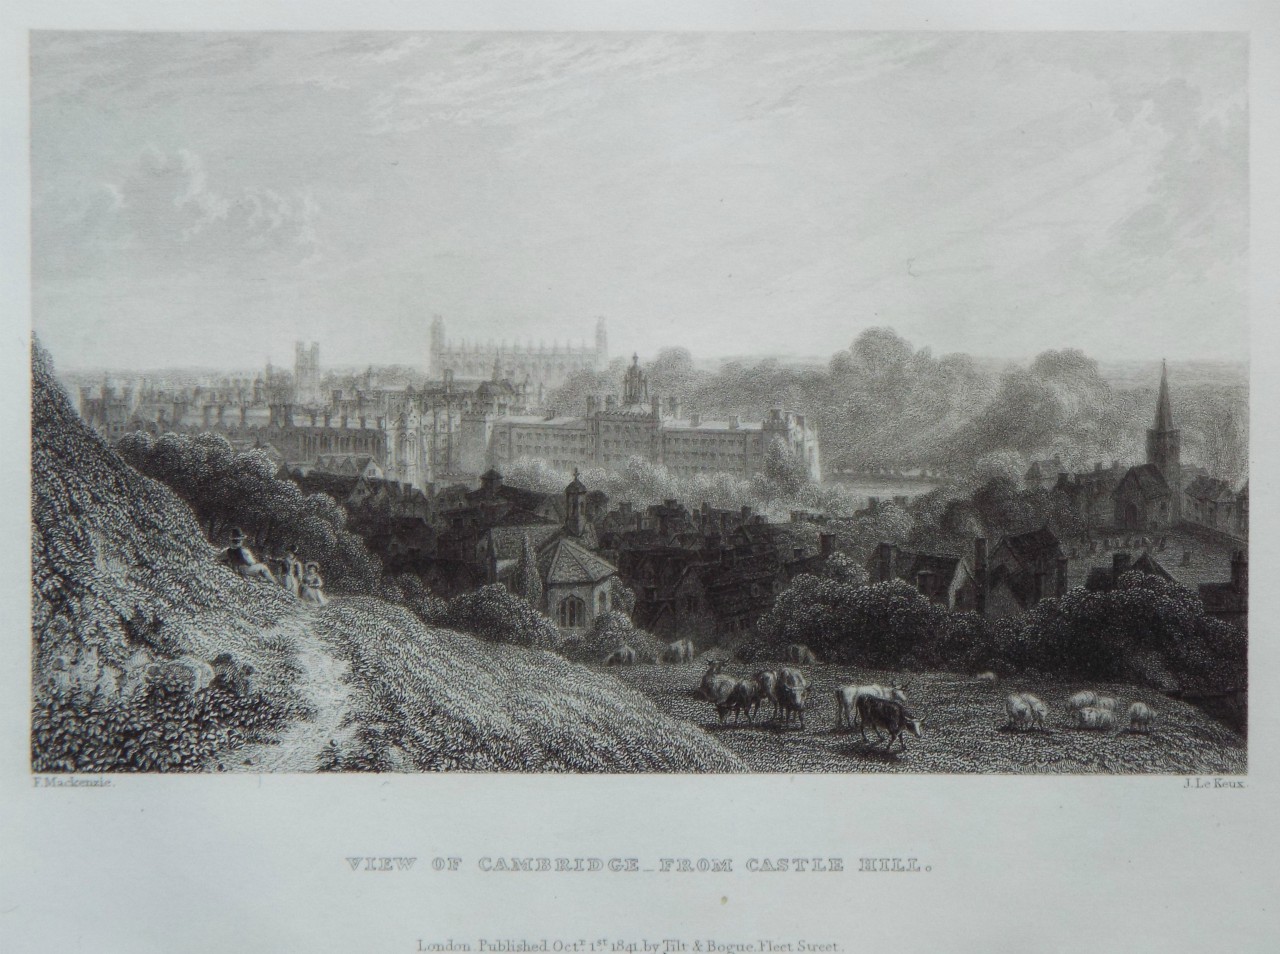 Print - View of Cambridge - From Castle Hill. - Le